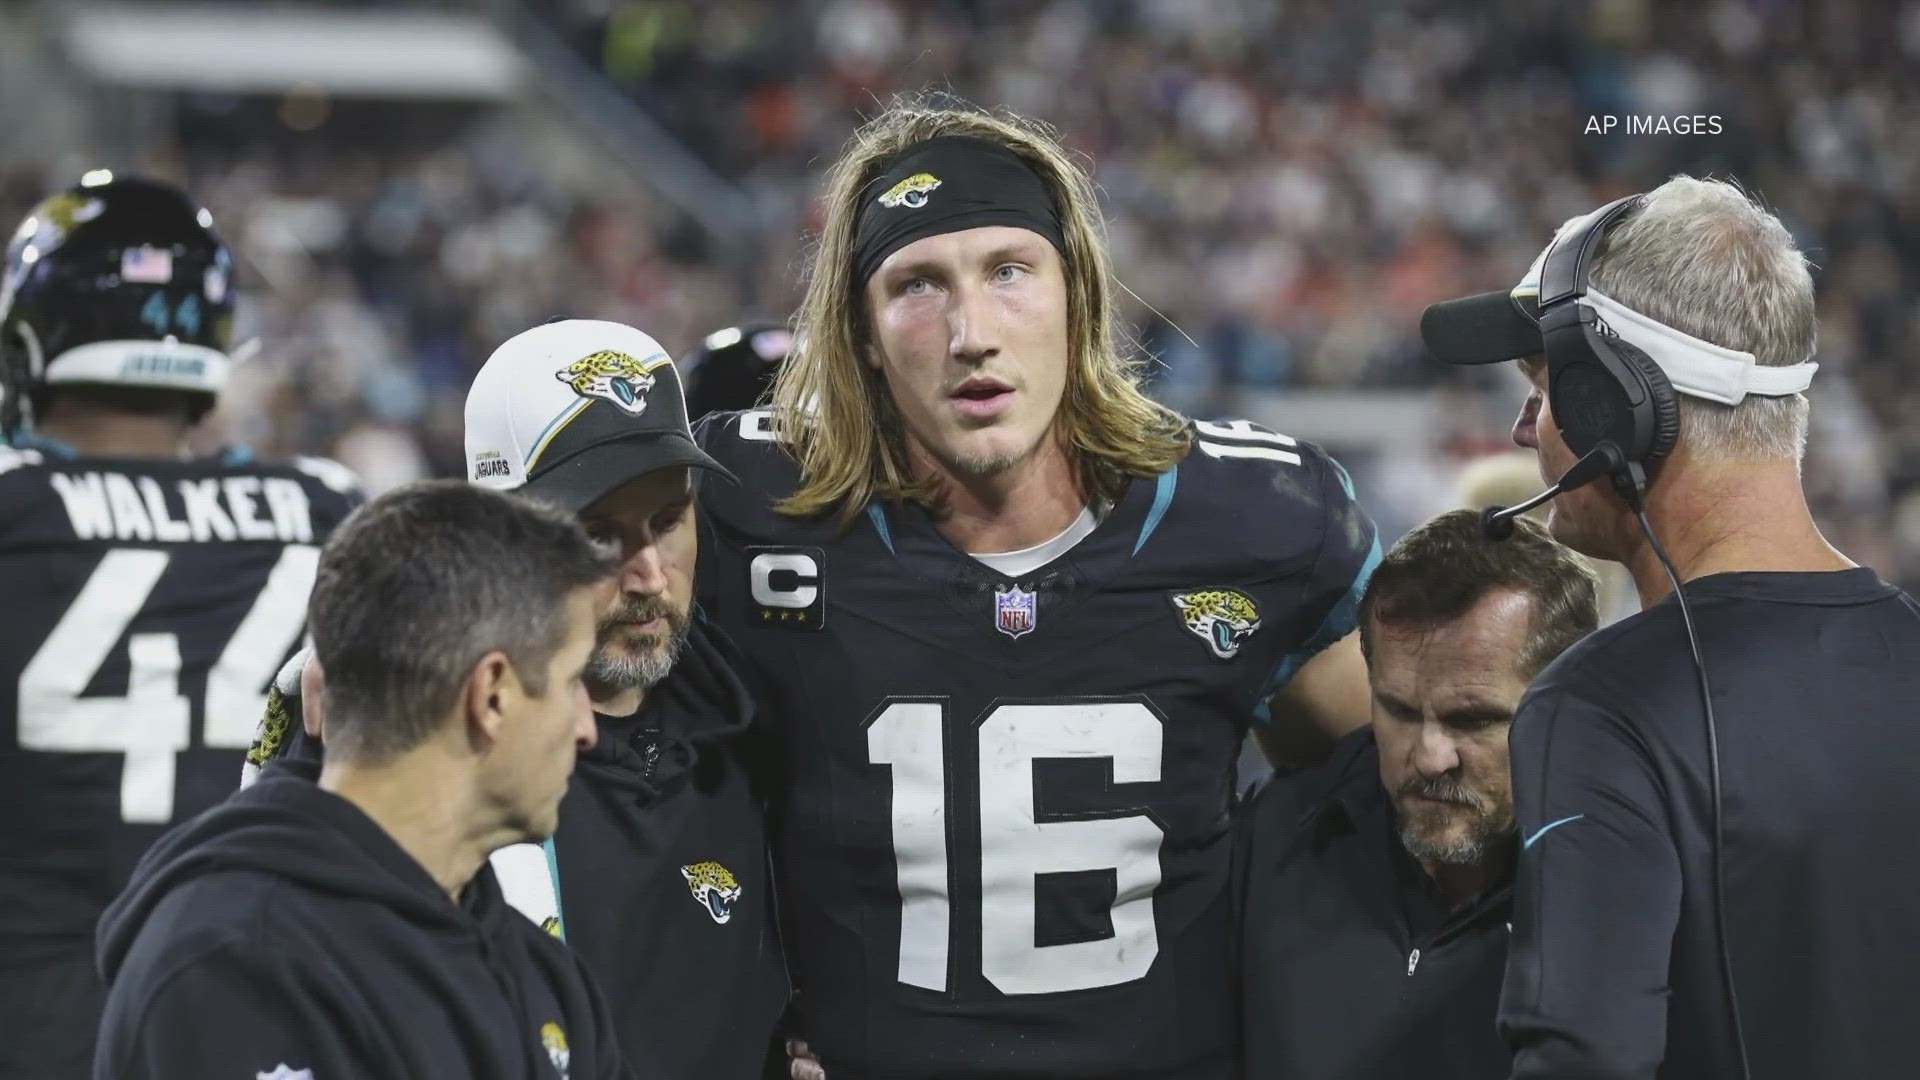 Jaguars fans react to Trevor Lawrence's ankle injury which he suffered during Jacksonville's 34-31 loss to the Cincinatti Bengals on Monday Night Football.